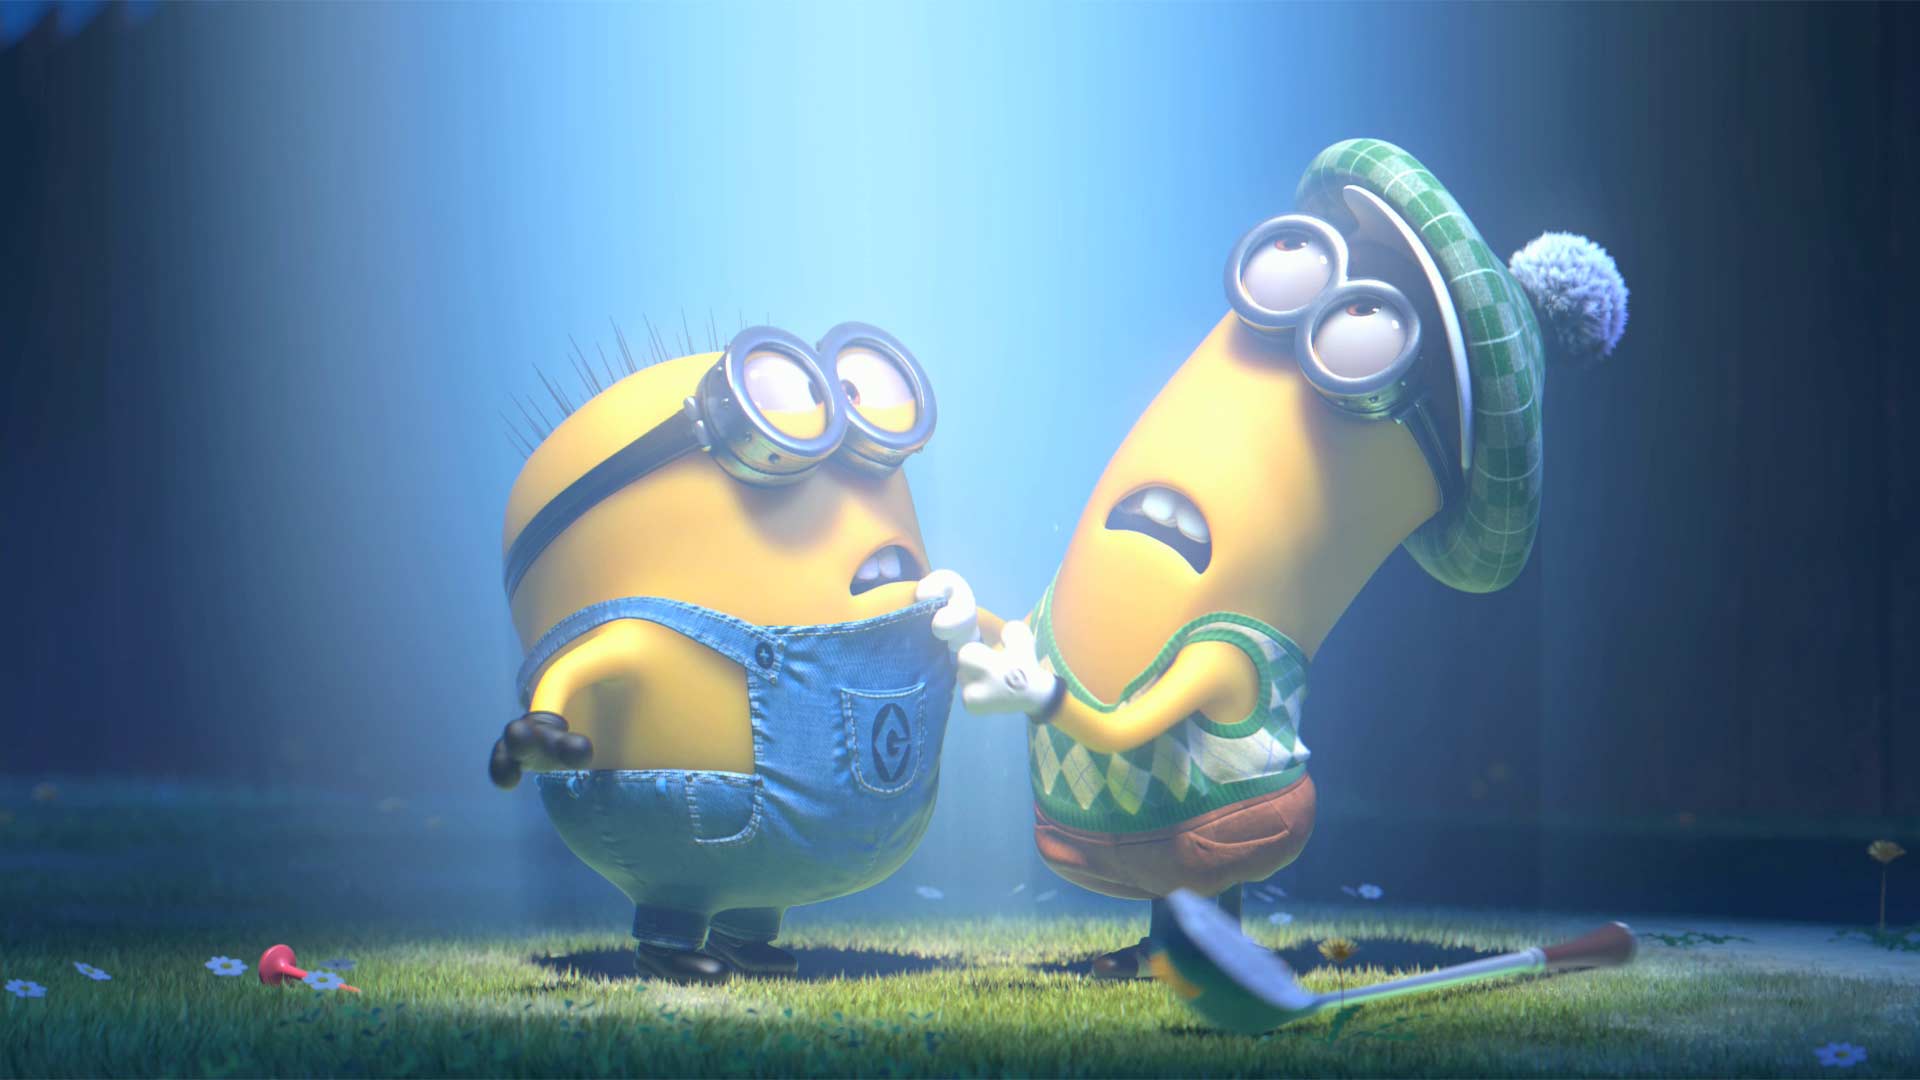 HD Despicable Me 2 Wallpapers & Desktop Backgrounds Movie Backgrounds